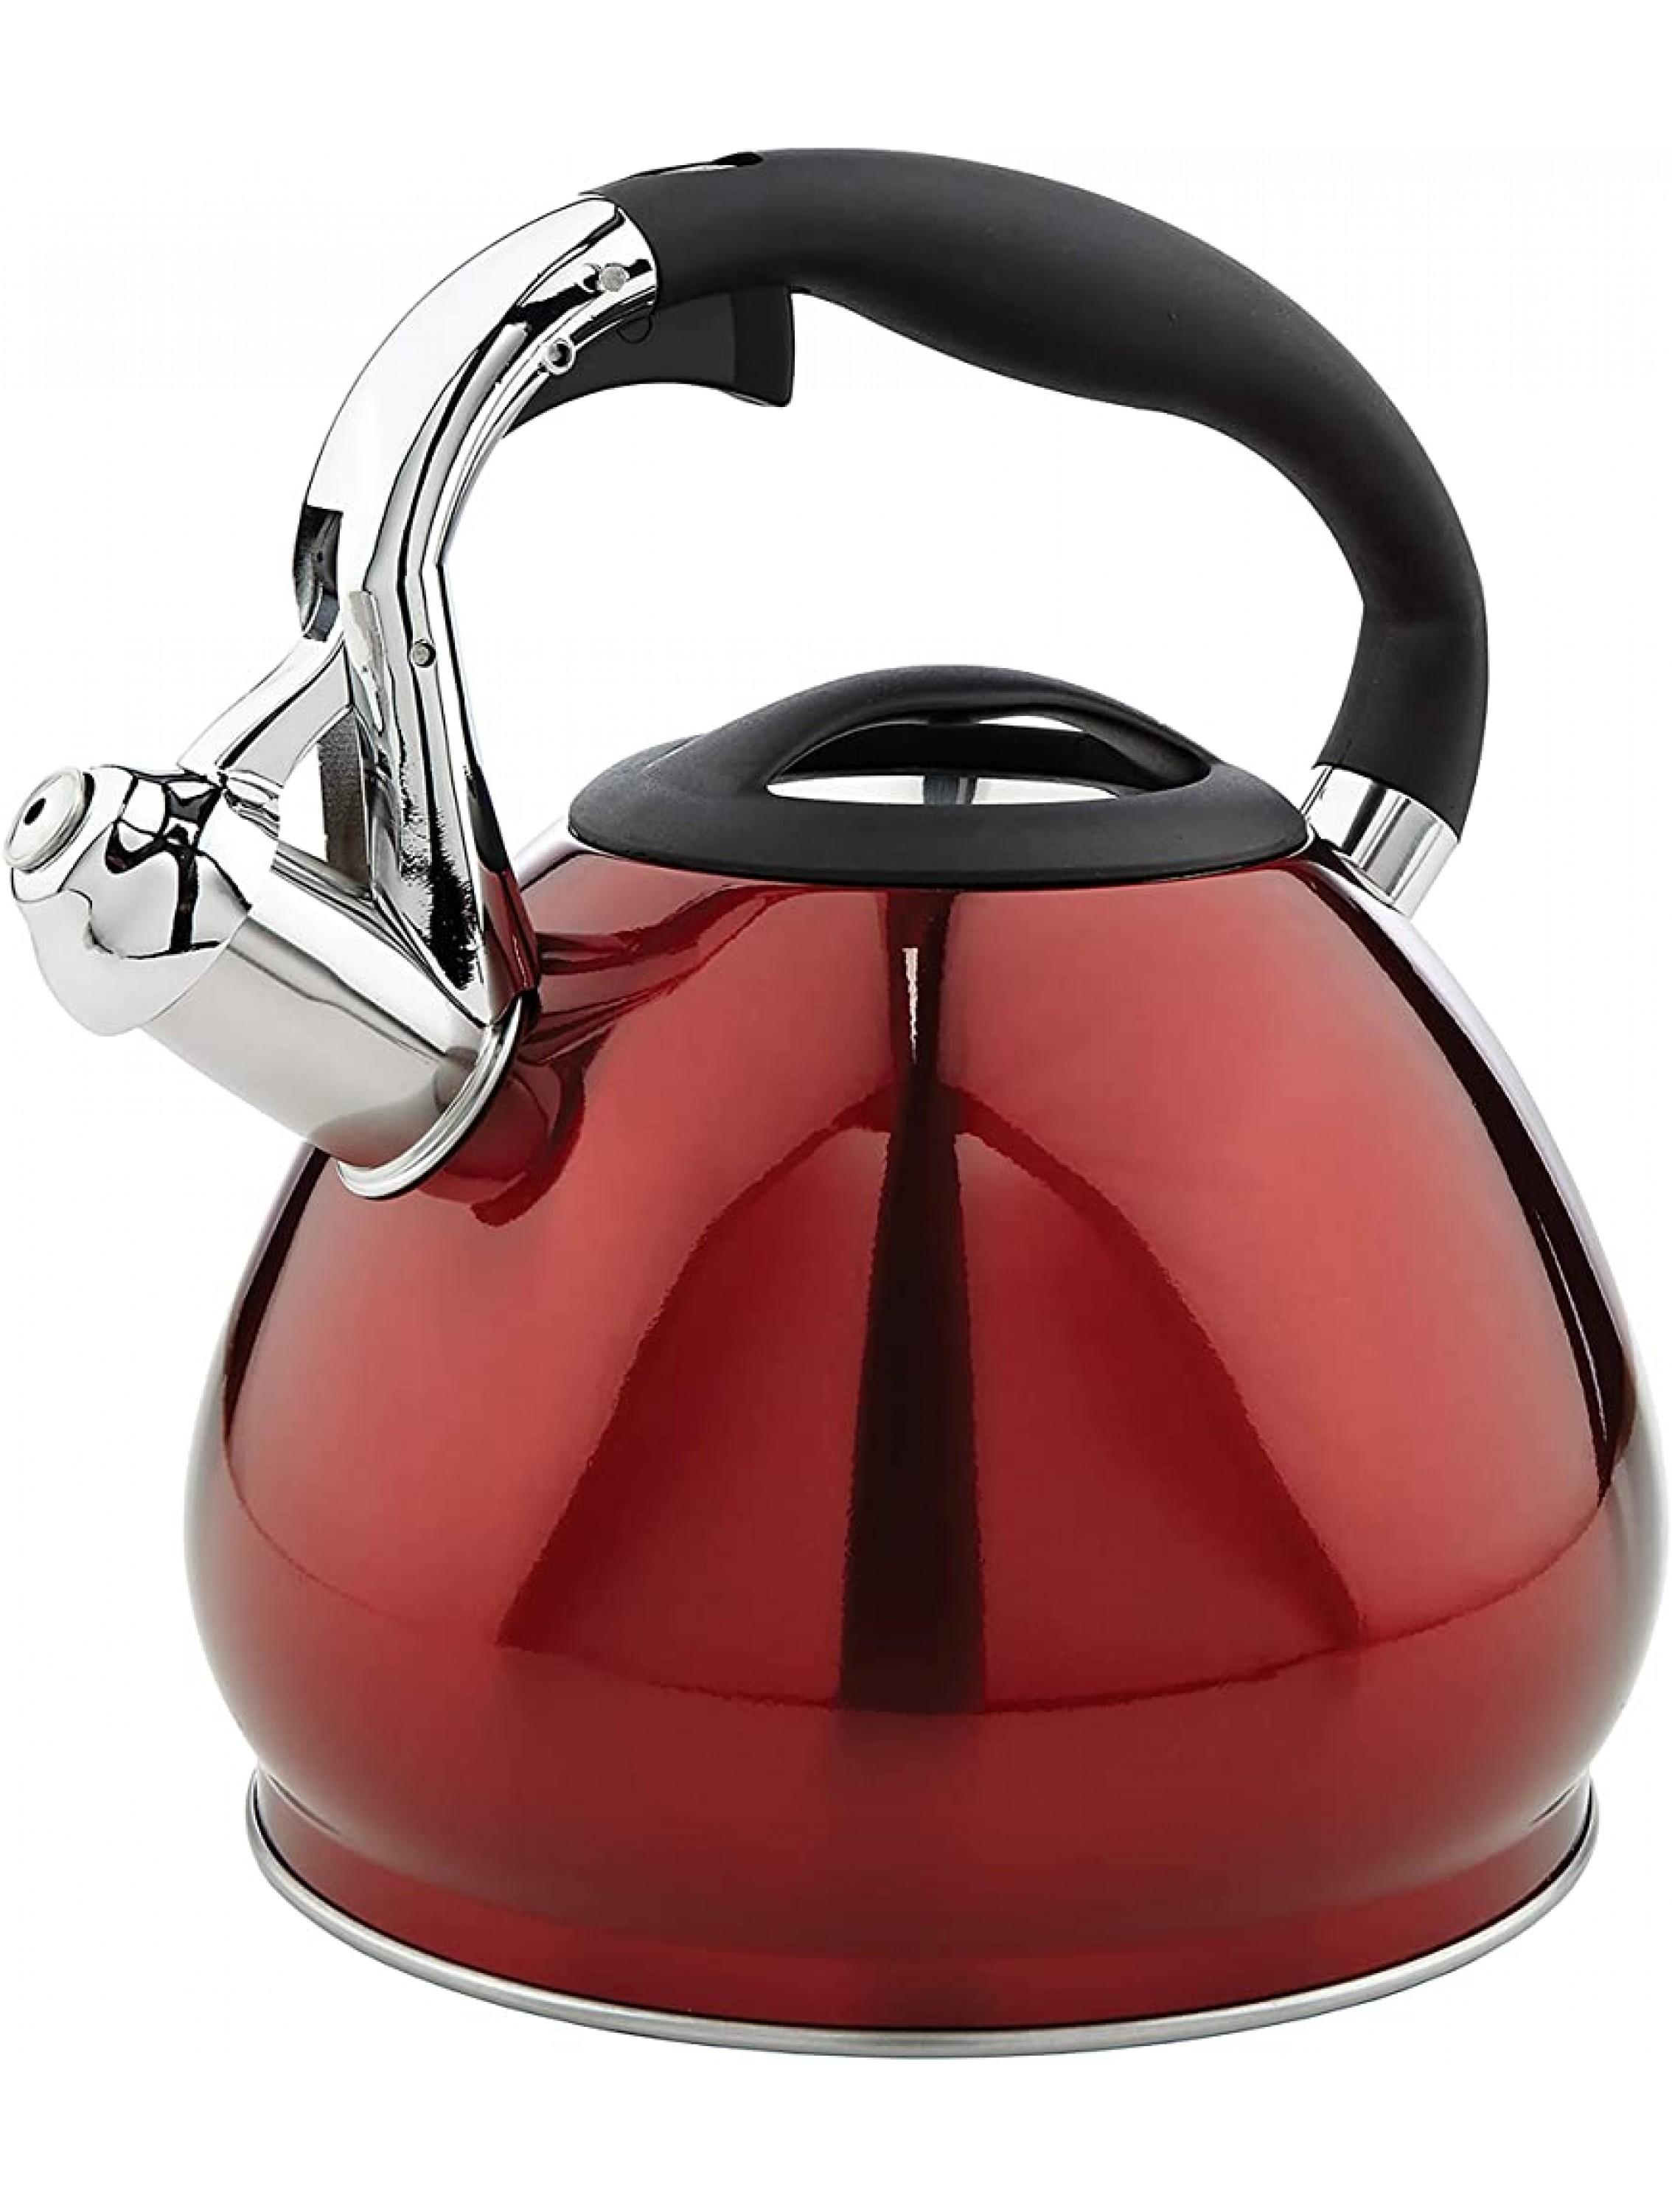 Kitchen Details 14 Cup Stovetop Stainless Steel Whistling Tea Kettle 7.75 x 9.5 x 9 Red - BVZDUUOIR